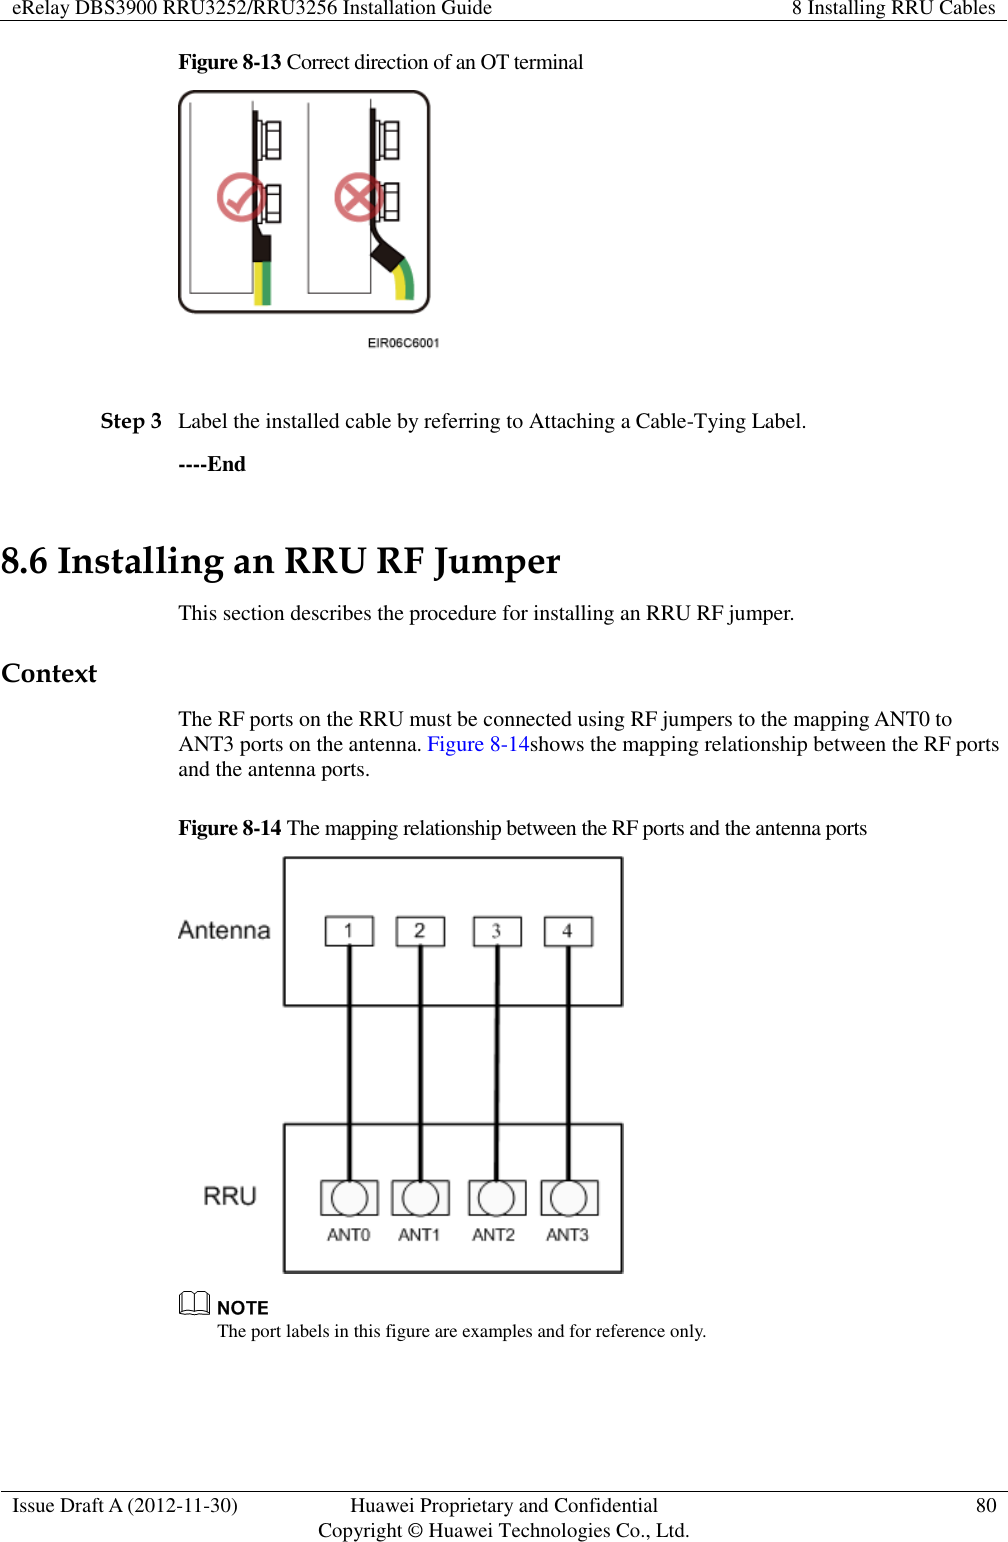 eRelay DBS3900 RRU3252/RRU3256 Installation Guide 8 Installing RRU Cables  Issue Draft A (2012-11-30) Huawei Proprietary and Confidential                                     Copyright © Huawei Technologies Co., Ltd. 80  Figure 8-13 Correct direction of an OT terminal   Step 3 Label the installed cable by referring to Attaching a Cable-Tying Label. ----End 8.6 Installing an RRU RF Jumper This section describes the procedure for installing an RRU RF jumper. Context The RF ports on the RRU must be connected using RF jumpers to the mapping ANT0 to ANT3 ports on the antenna. Figure 8-14shows the mapping relationship between the RF ports and the antenna ports. Figure 8-14 The mapping relationship between the RF ports and the antenna ports   The port labels in this figure are examples and for reference only.  